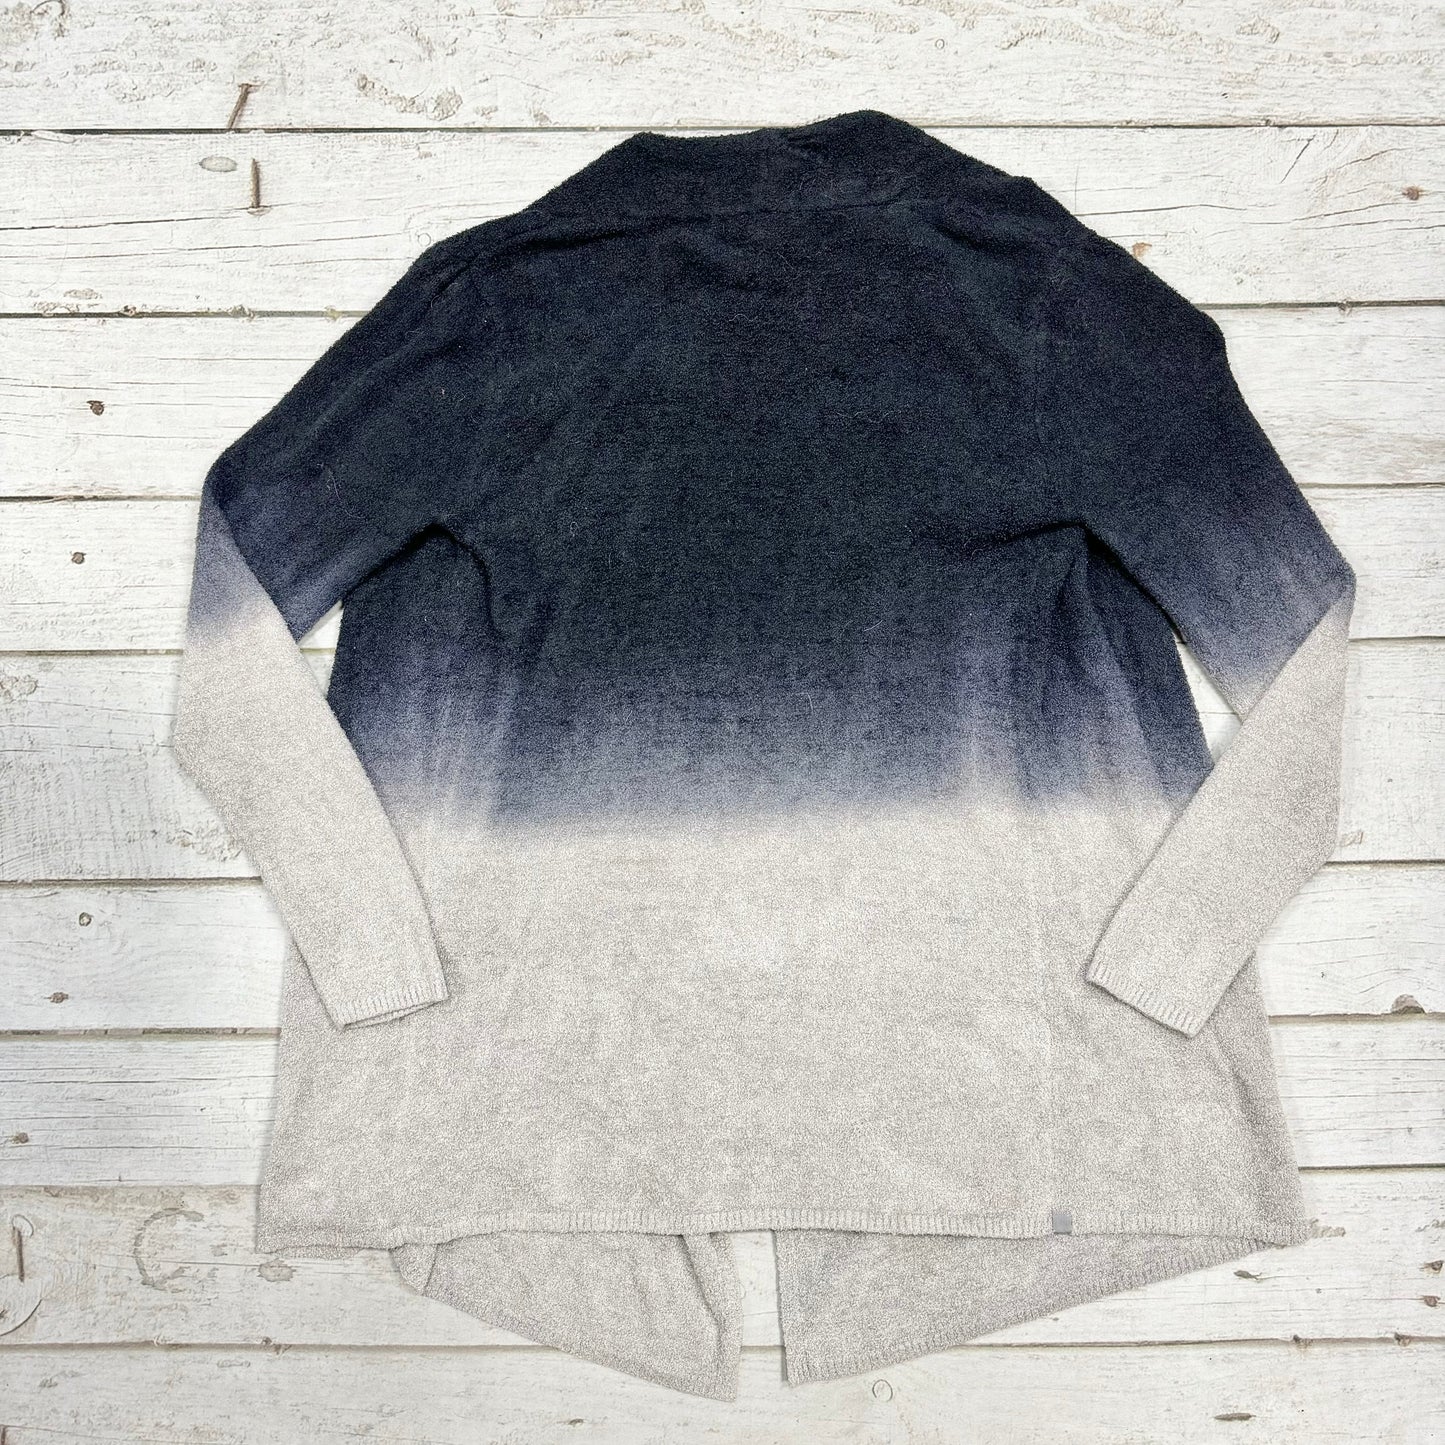 Sweater By Barefoot Dreams Size: L/Xl